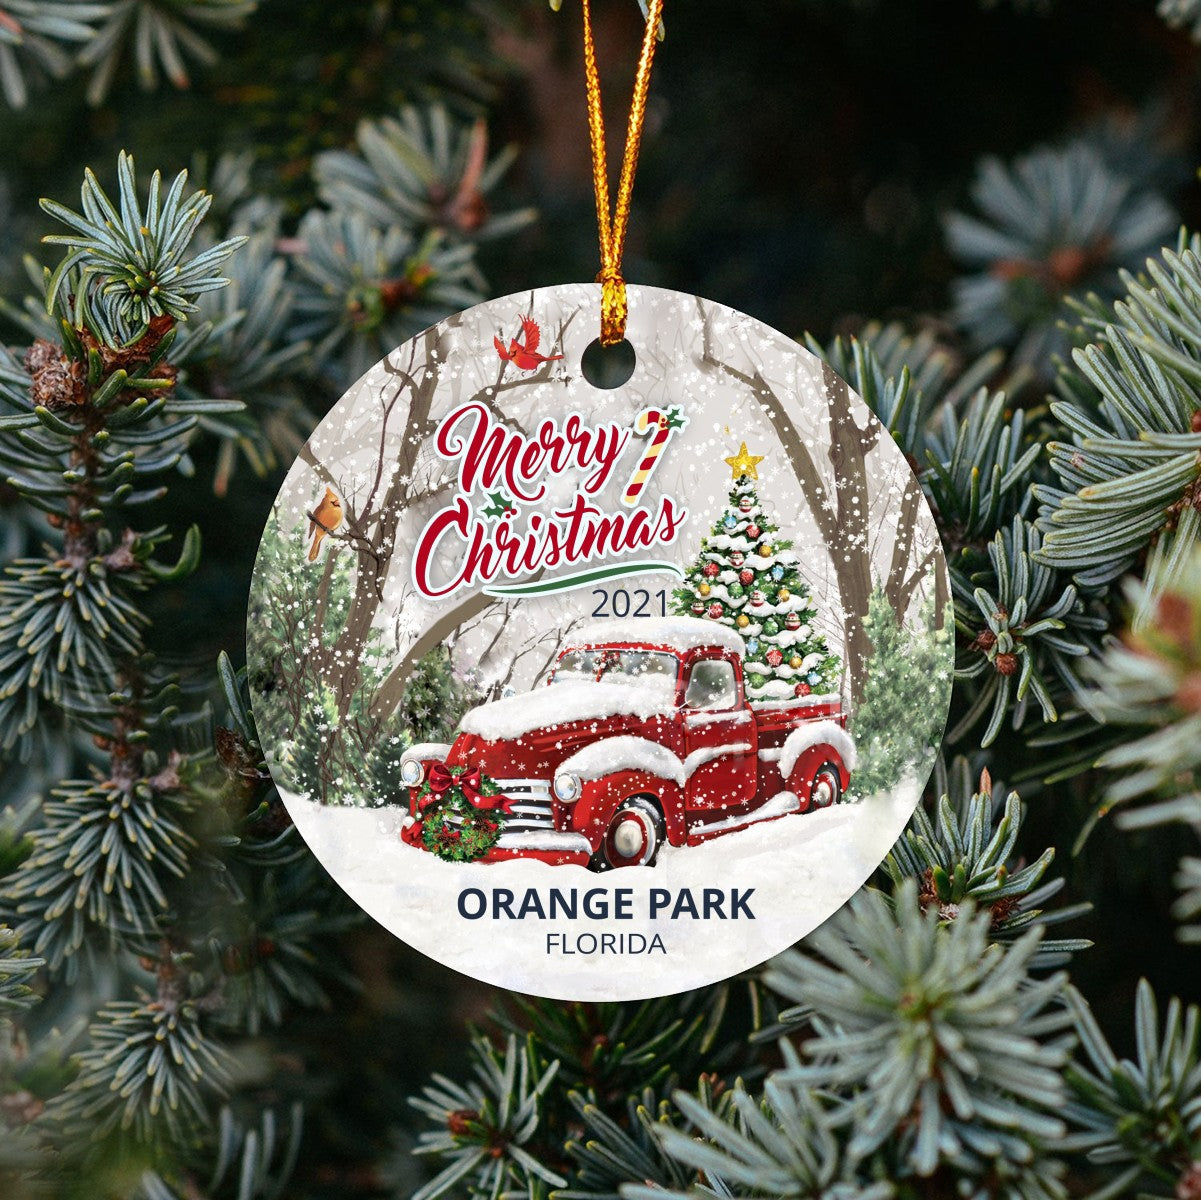 Christmas Tree Ornaments Orange Park - Ornament Customize With Name City And State Orange Park Florida FL - Red Truck Xmas Ornaments 3'' Plastic Gift For Family, Friend And Housewarming